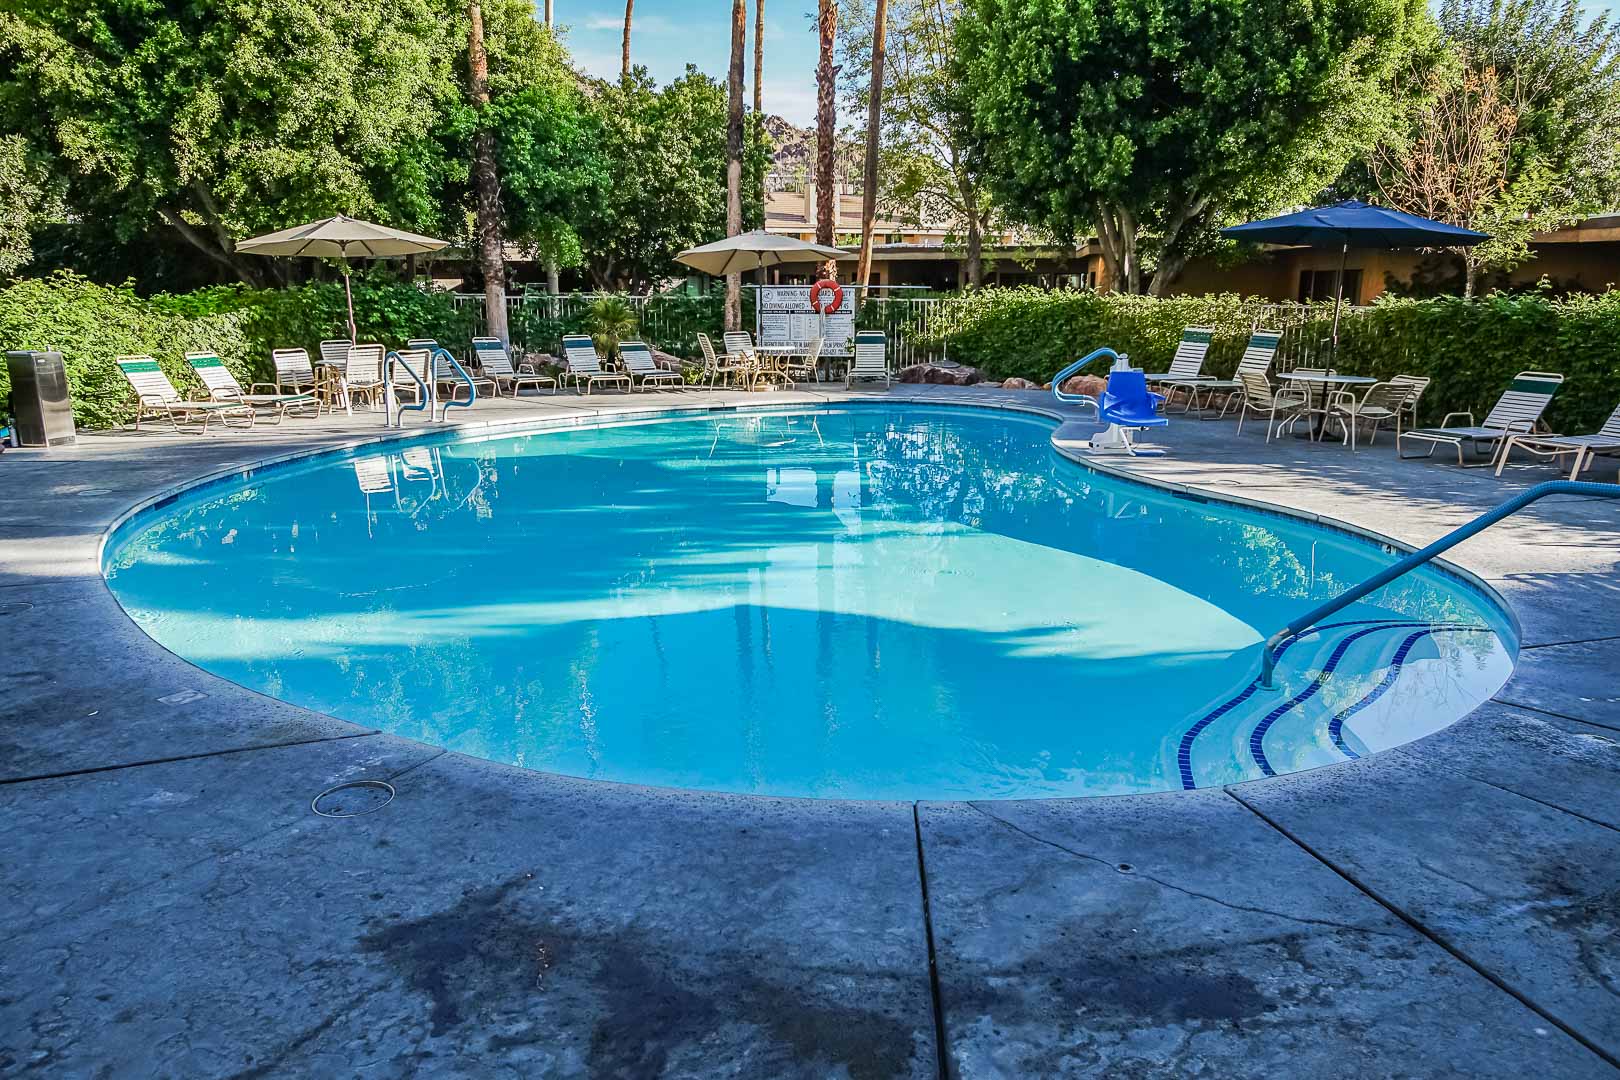 A peaceful outdoor swimming pool at VRI's Palm Springs Tennis Club in California.